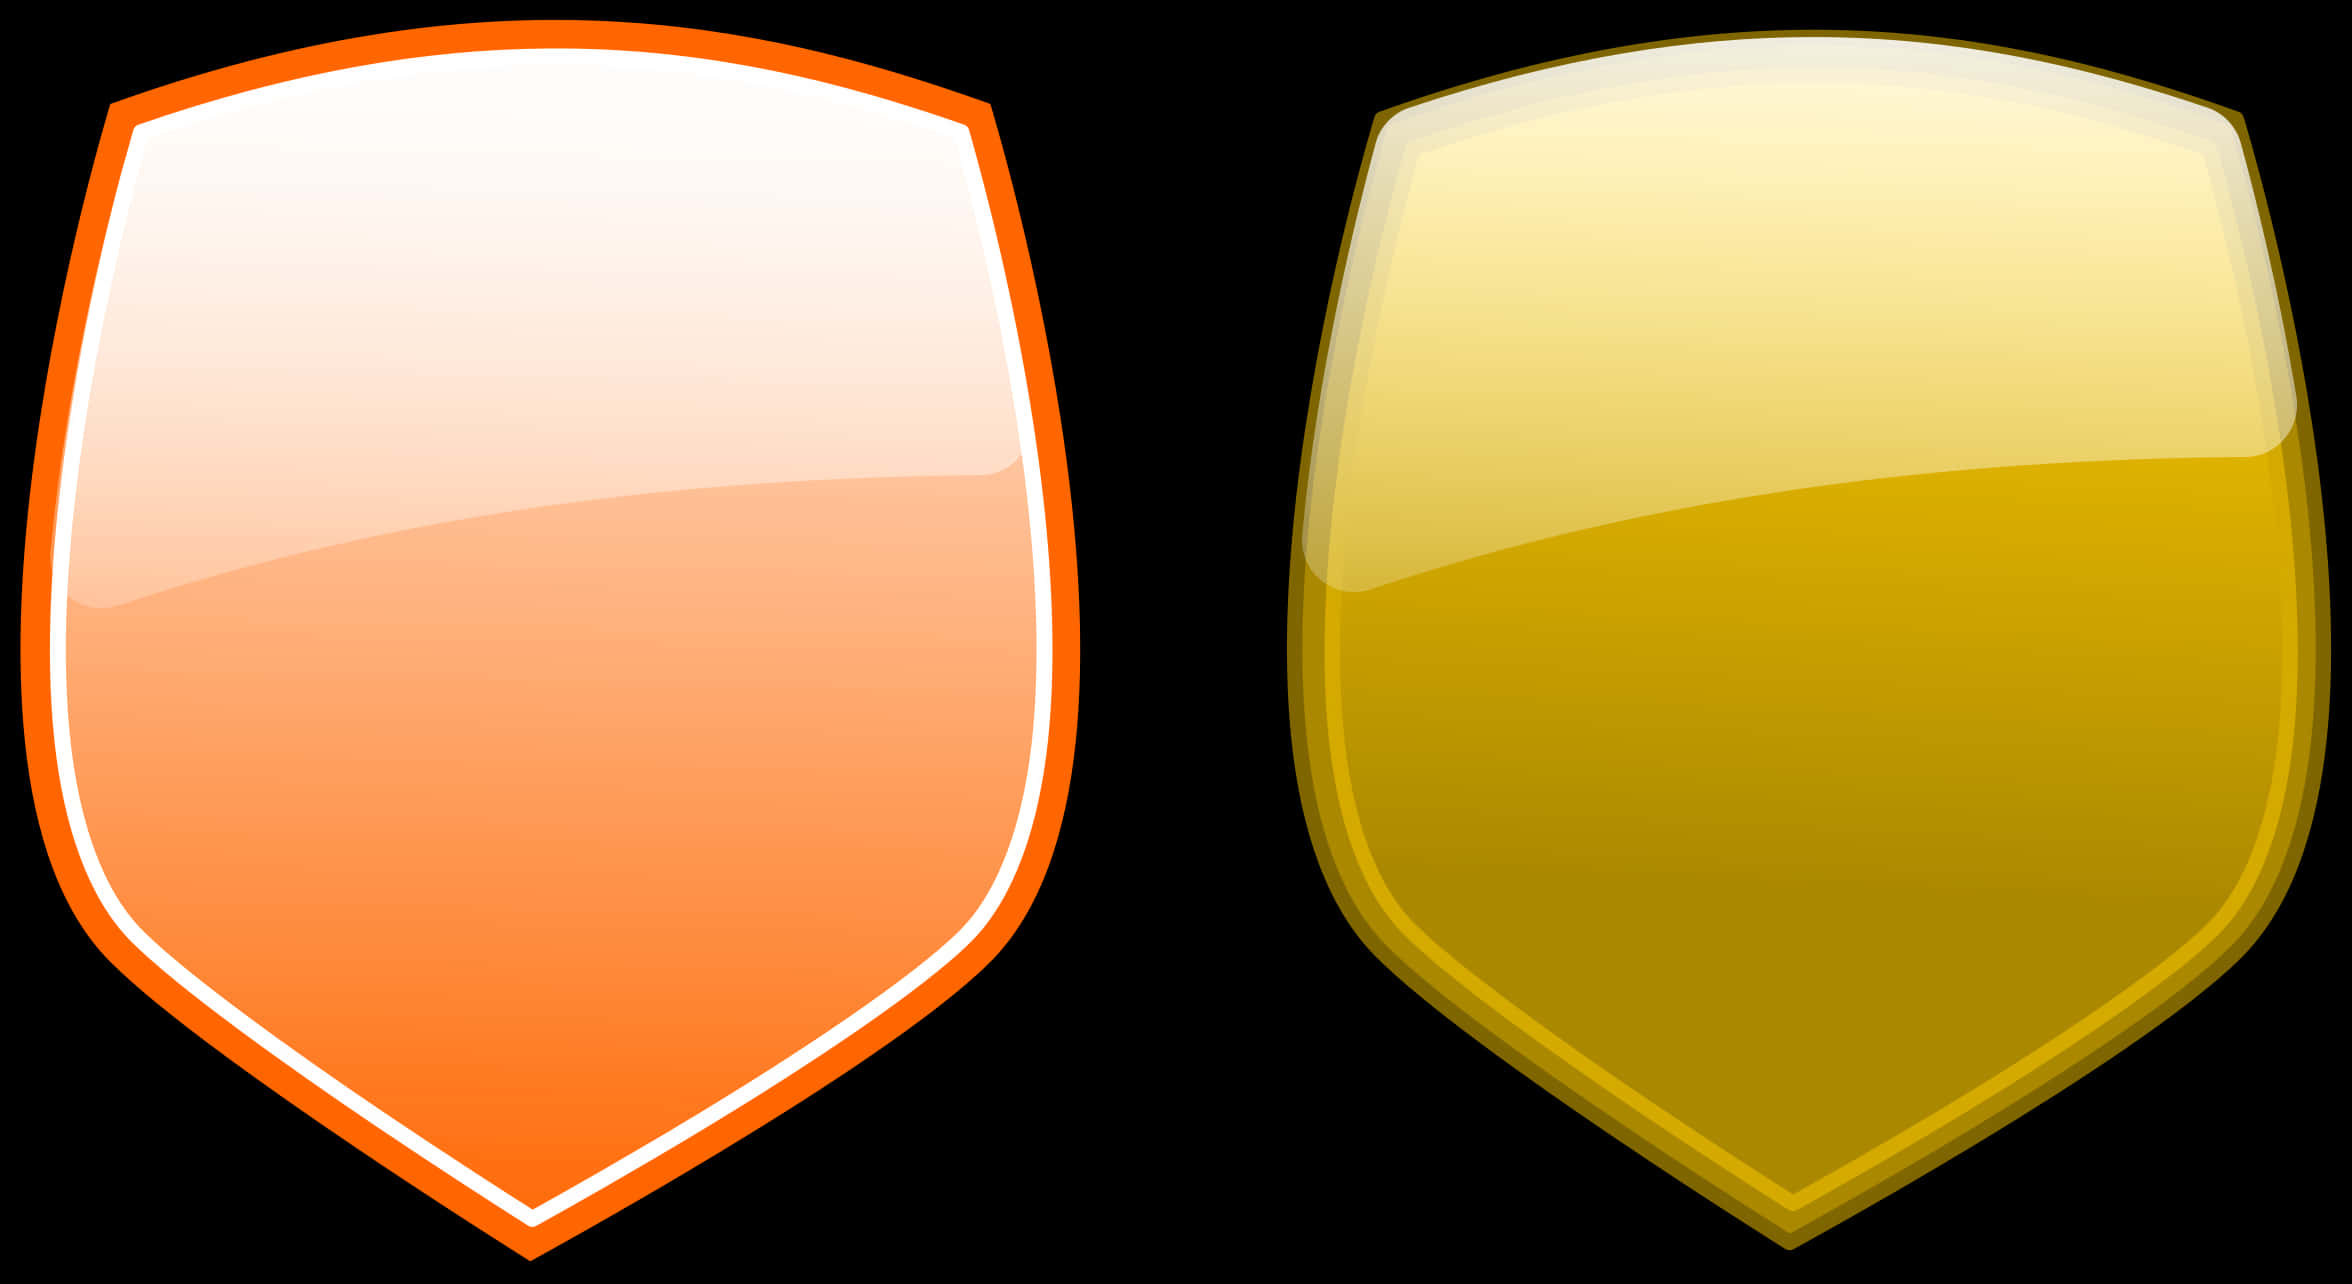 Orangeand Gold Shields PNG